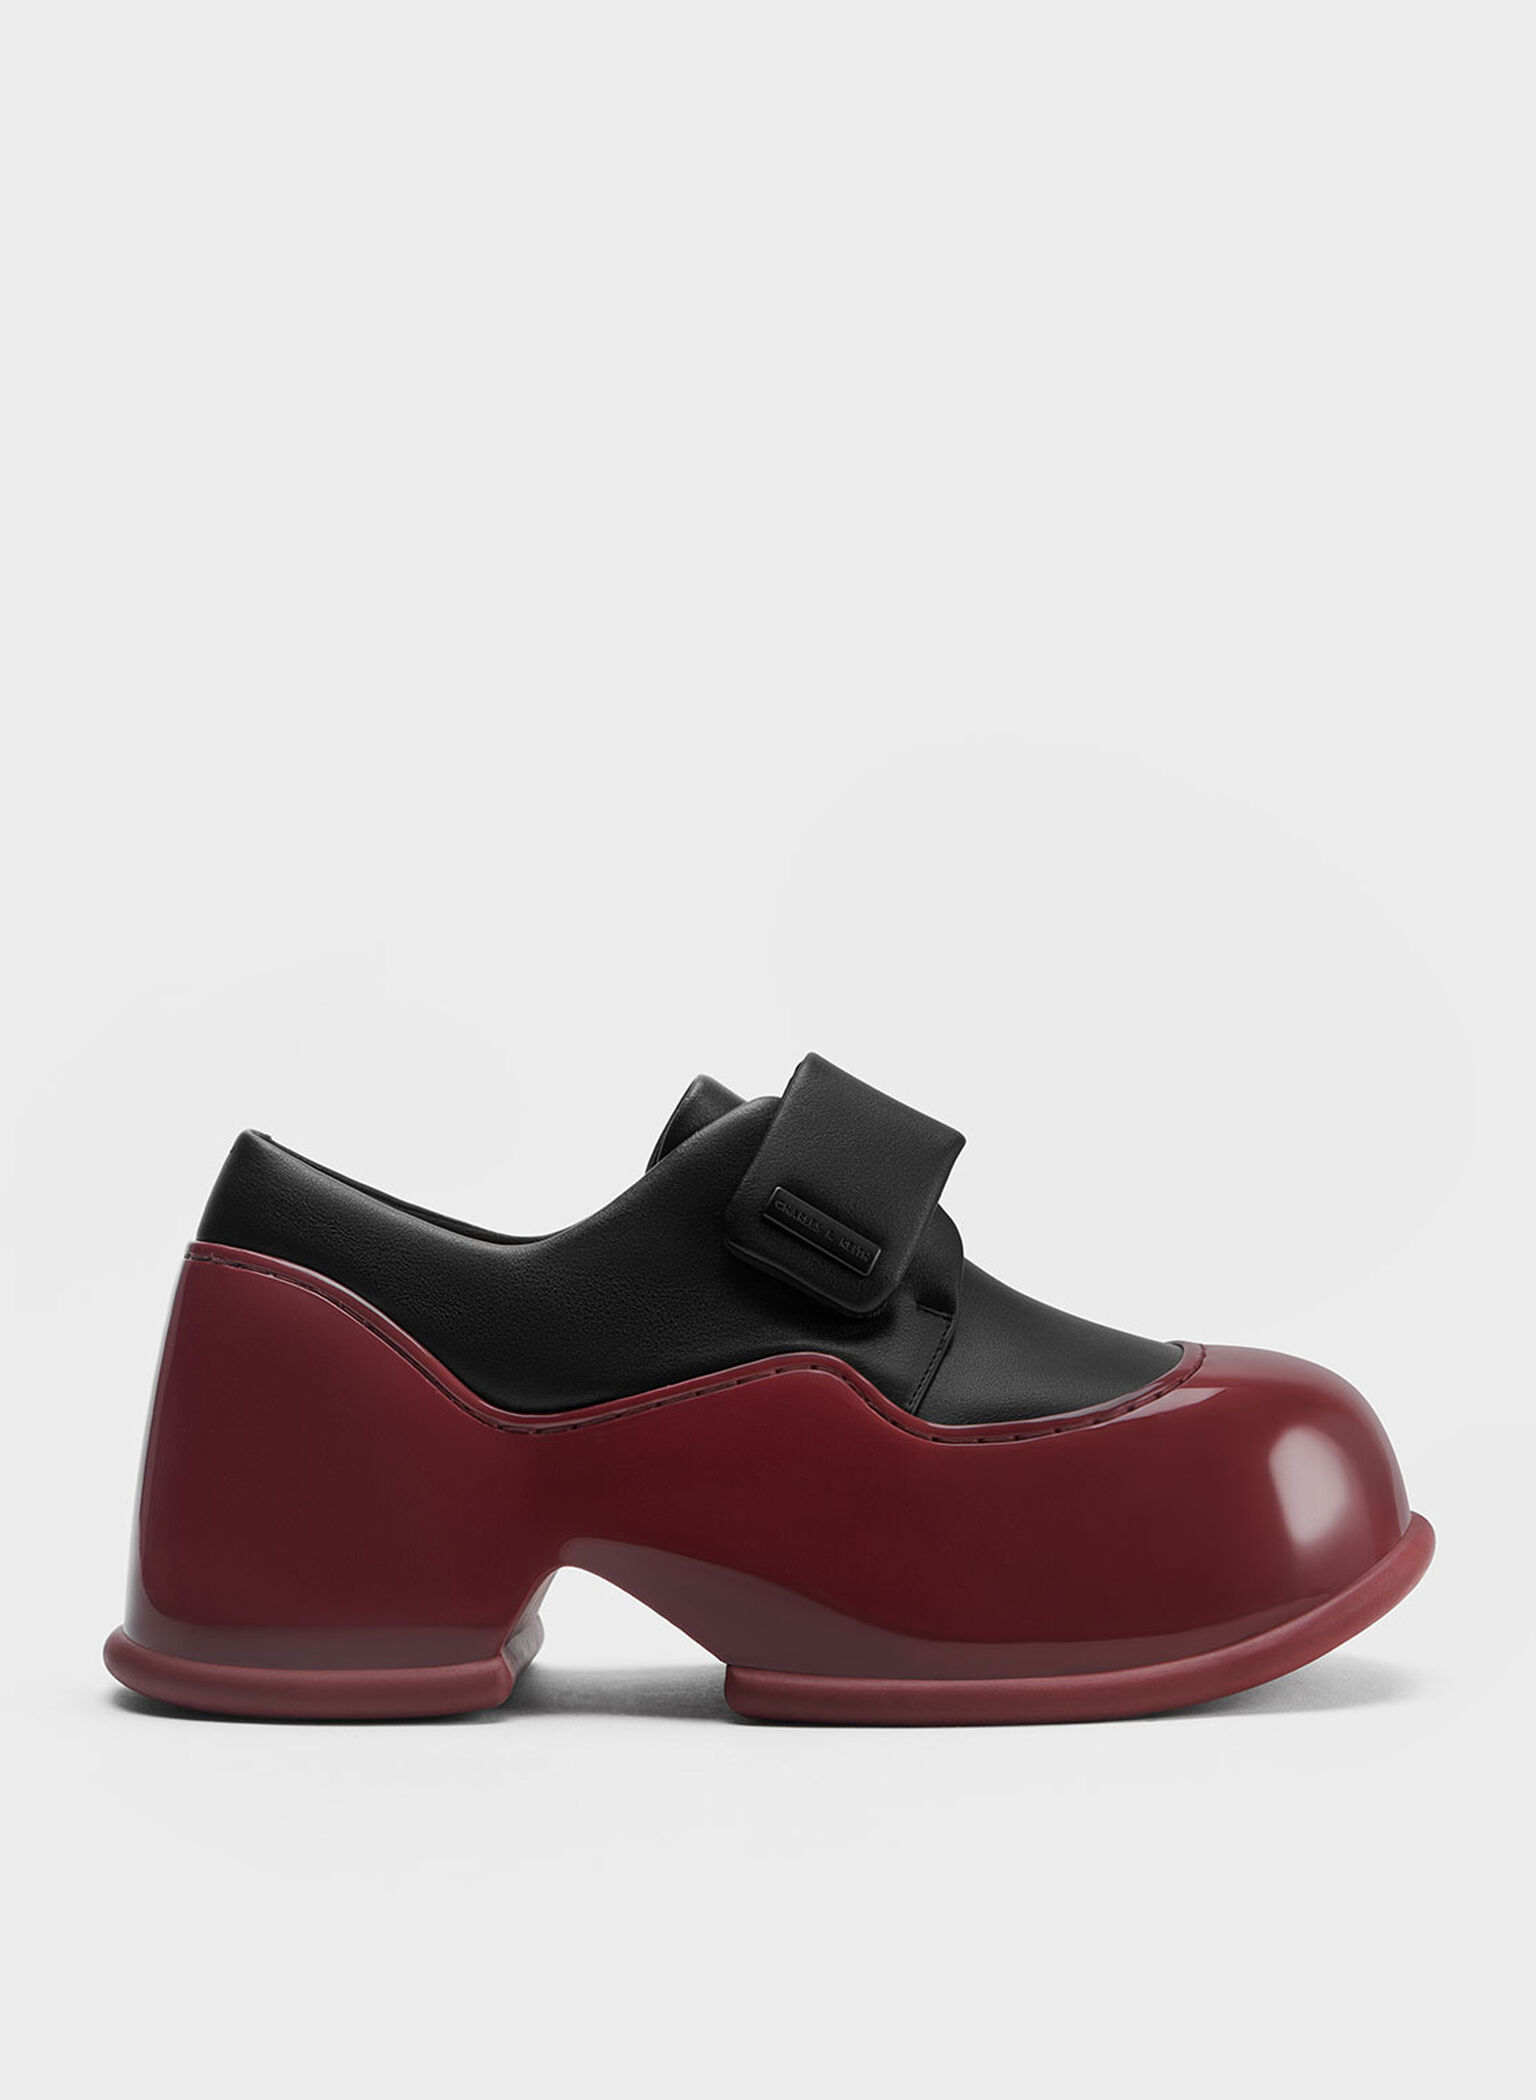 Pixie Patent Two-Tone Platform Loafers, Red, hi-res